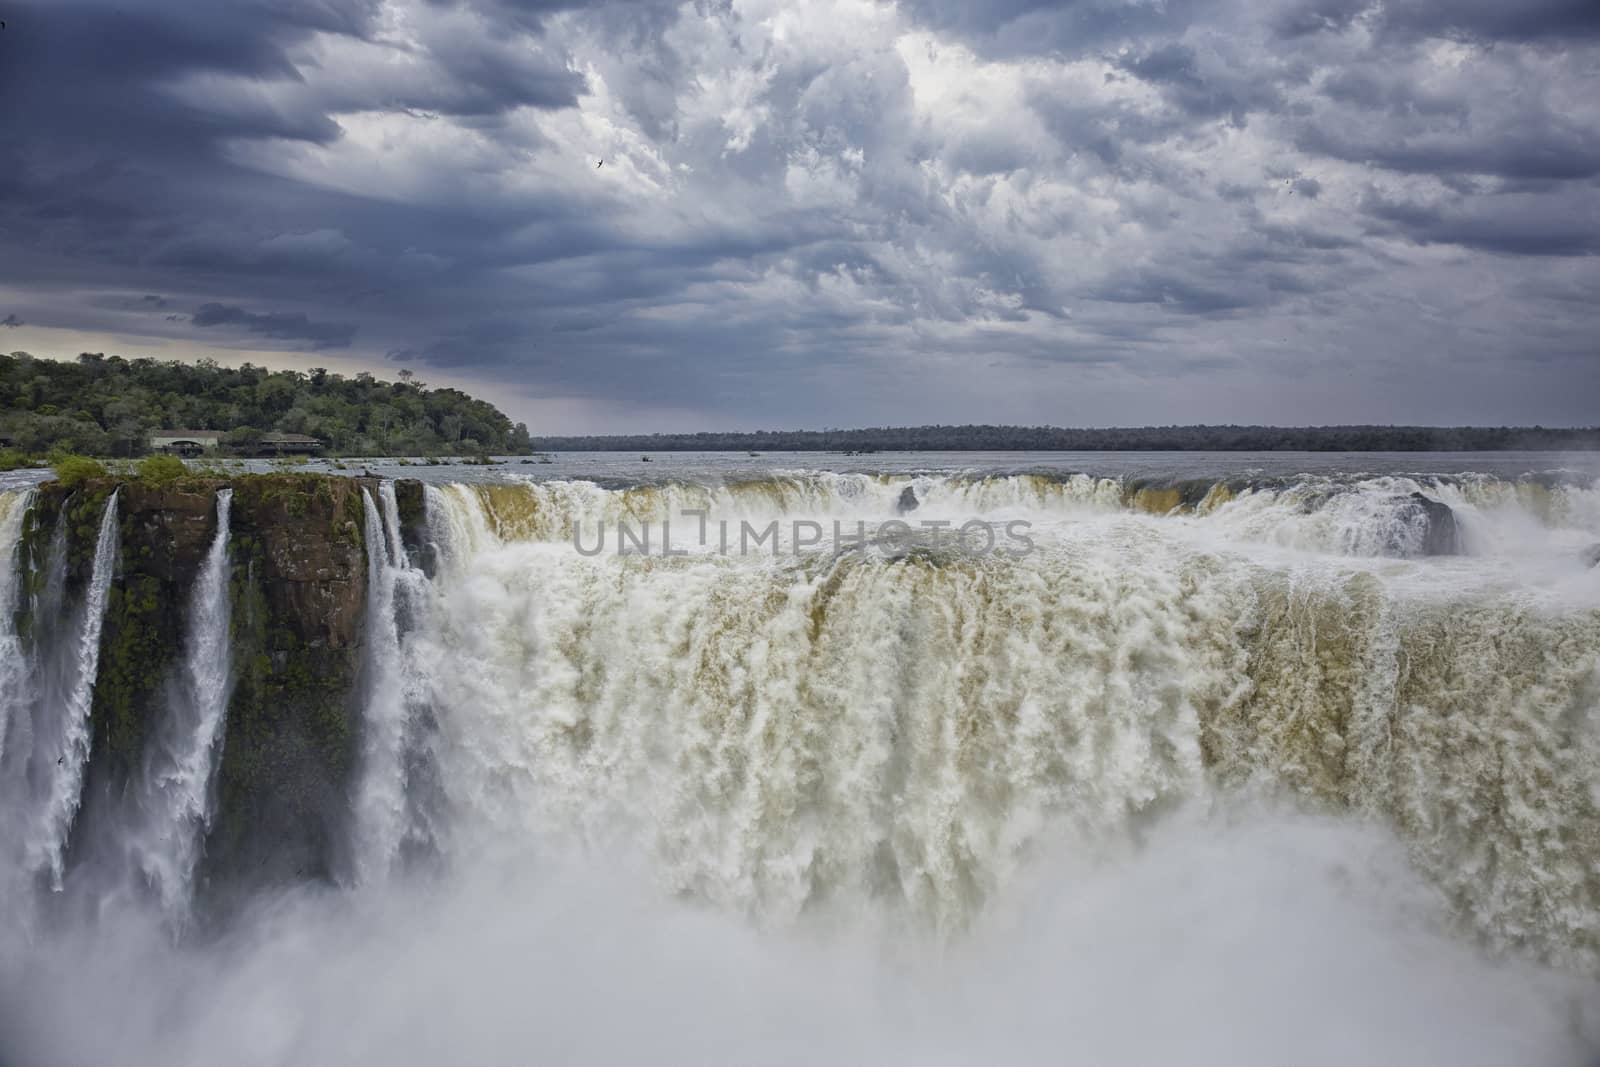 The area of Iguazu Falls is a set of about 275 waterfalls in the Iguazu River (catchment area of the river Parana), located between the Iguazu National Park, Parana (Brazil) and the Iguazu National Park in Misiones (Argentina) the border between the two countries. The total area of both national parks, correspond to 250,000 hectares of subtropical rainforest and is considered Natural World Heritage